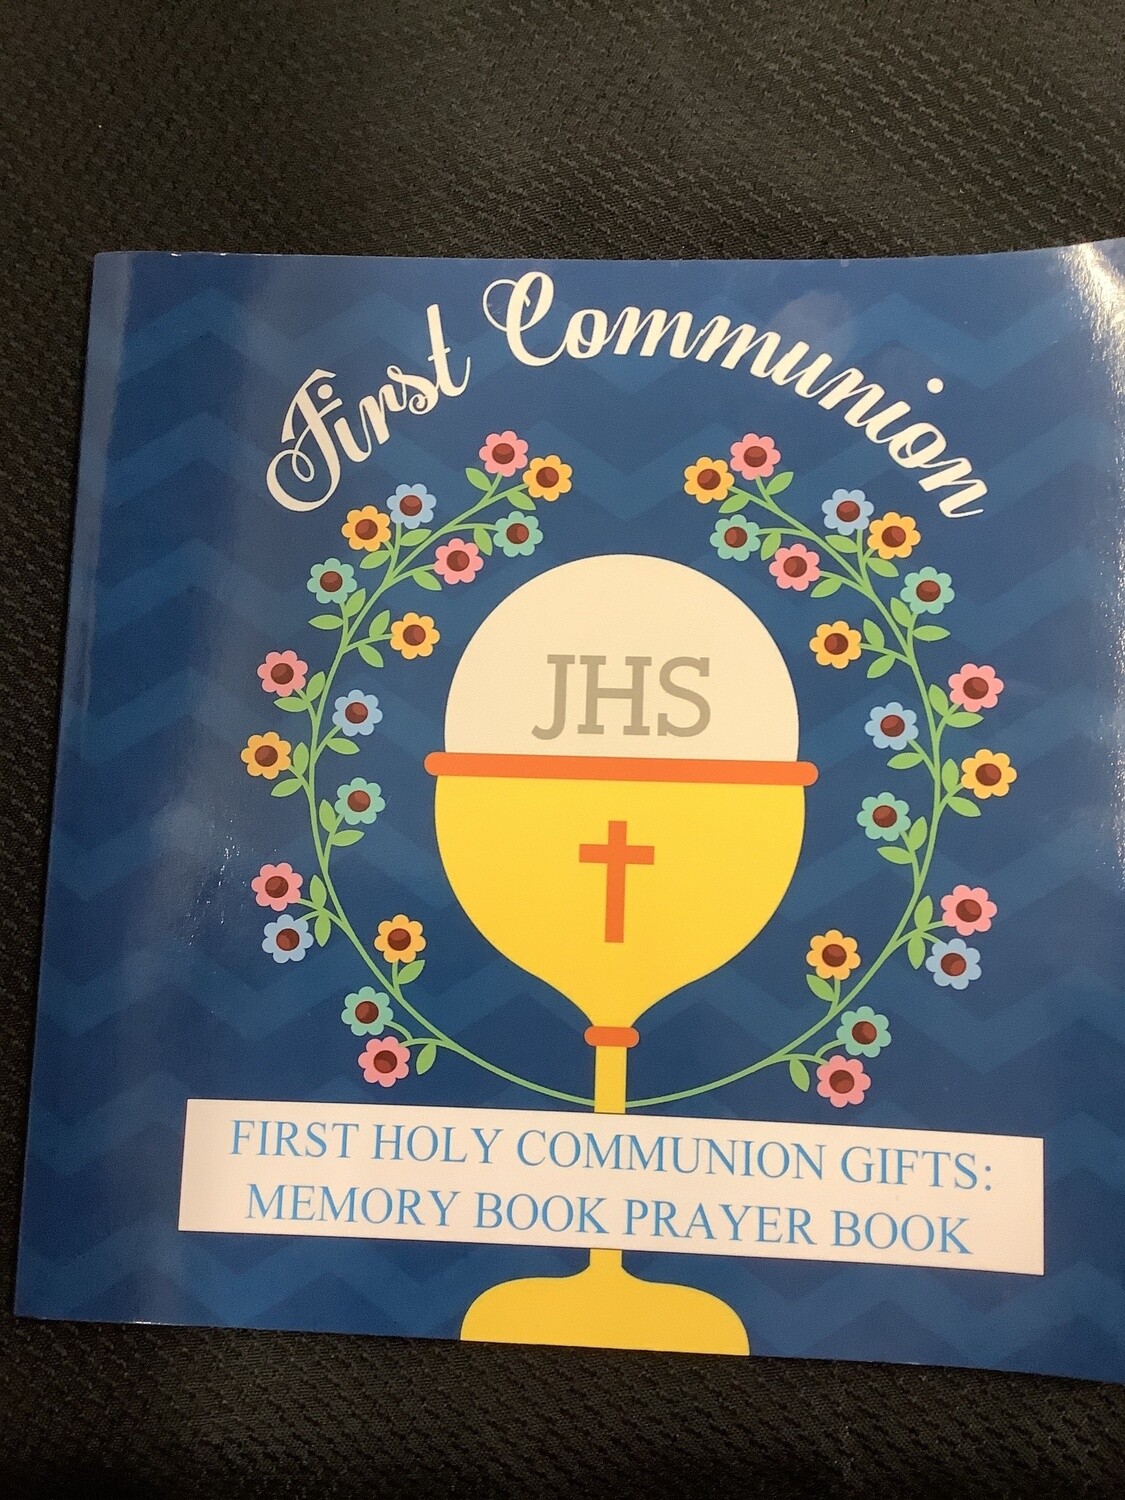 First Communion First Holy Communion Gifts: Memory Book Prayer Book